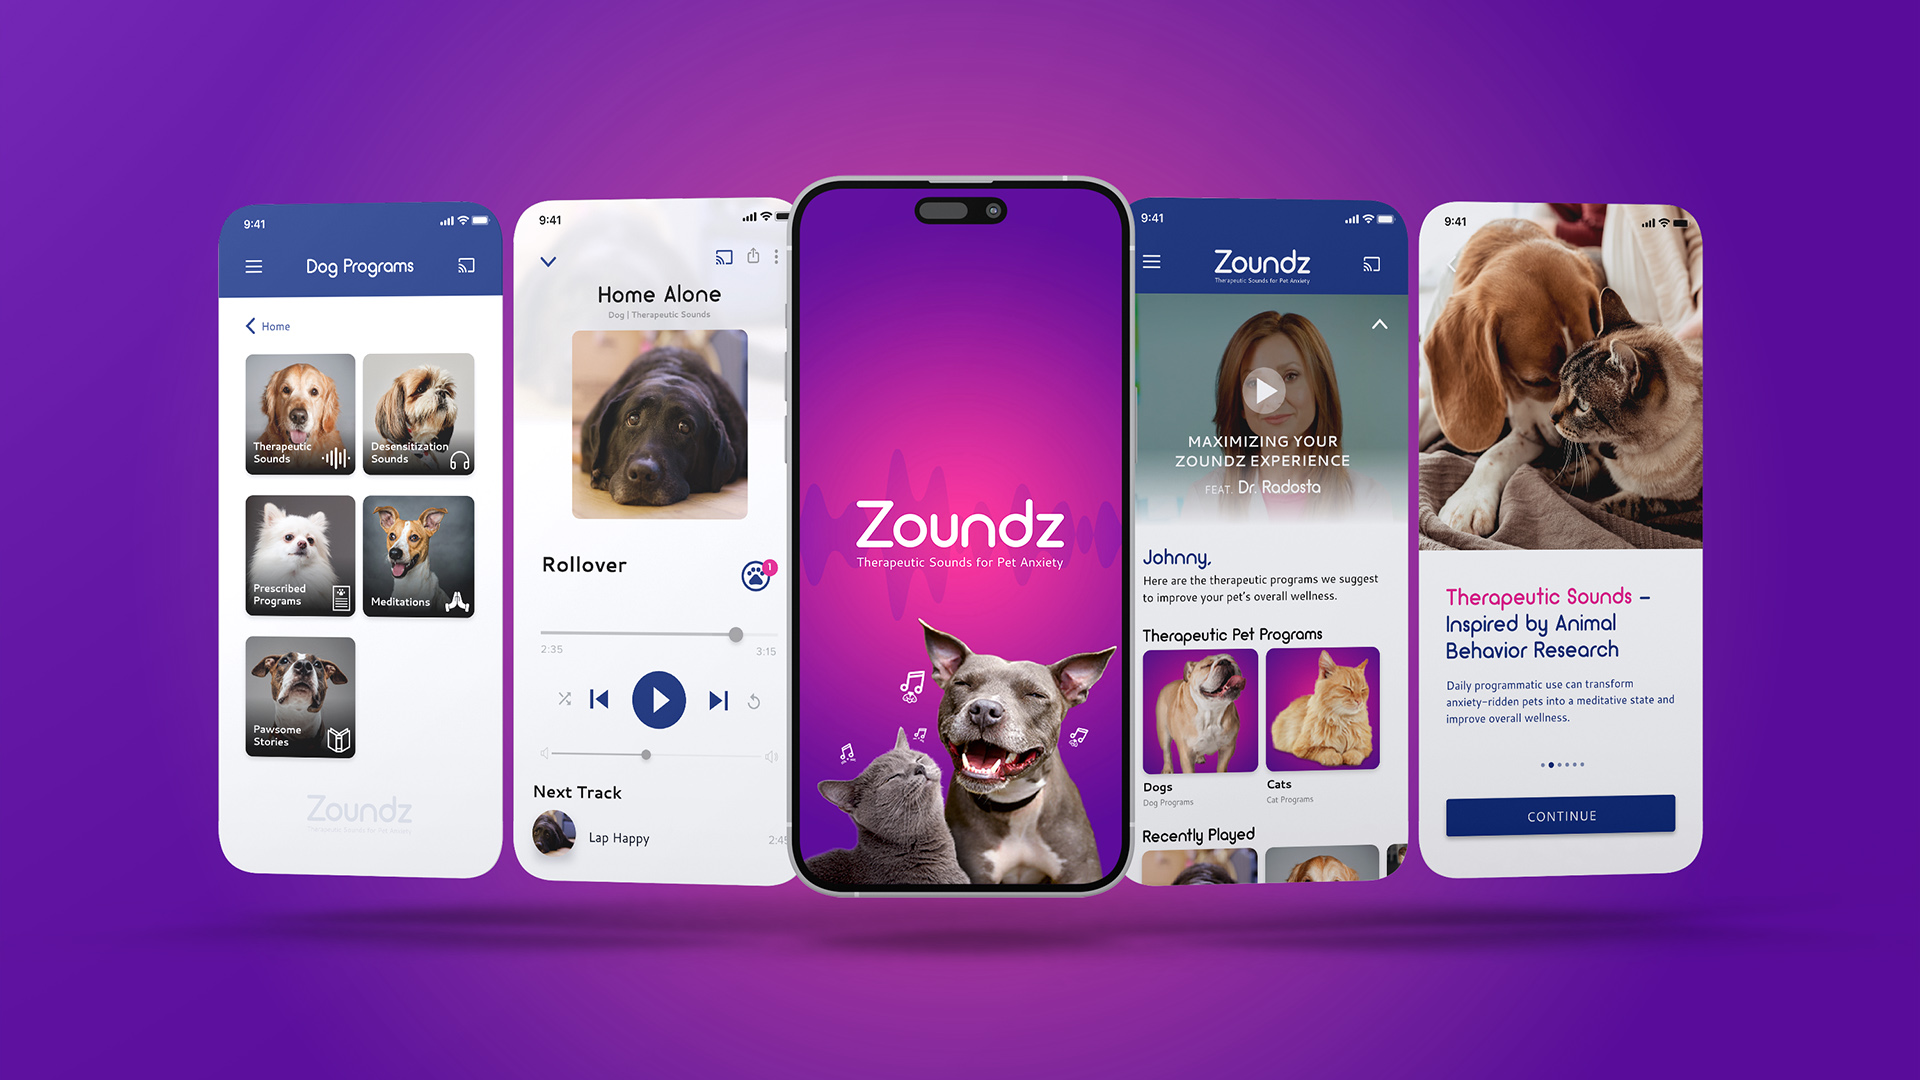 Zoundz Therapeutic Sounds for Pet Anxiety App